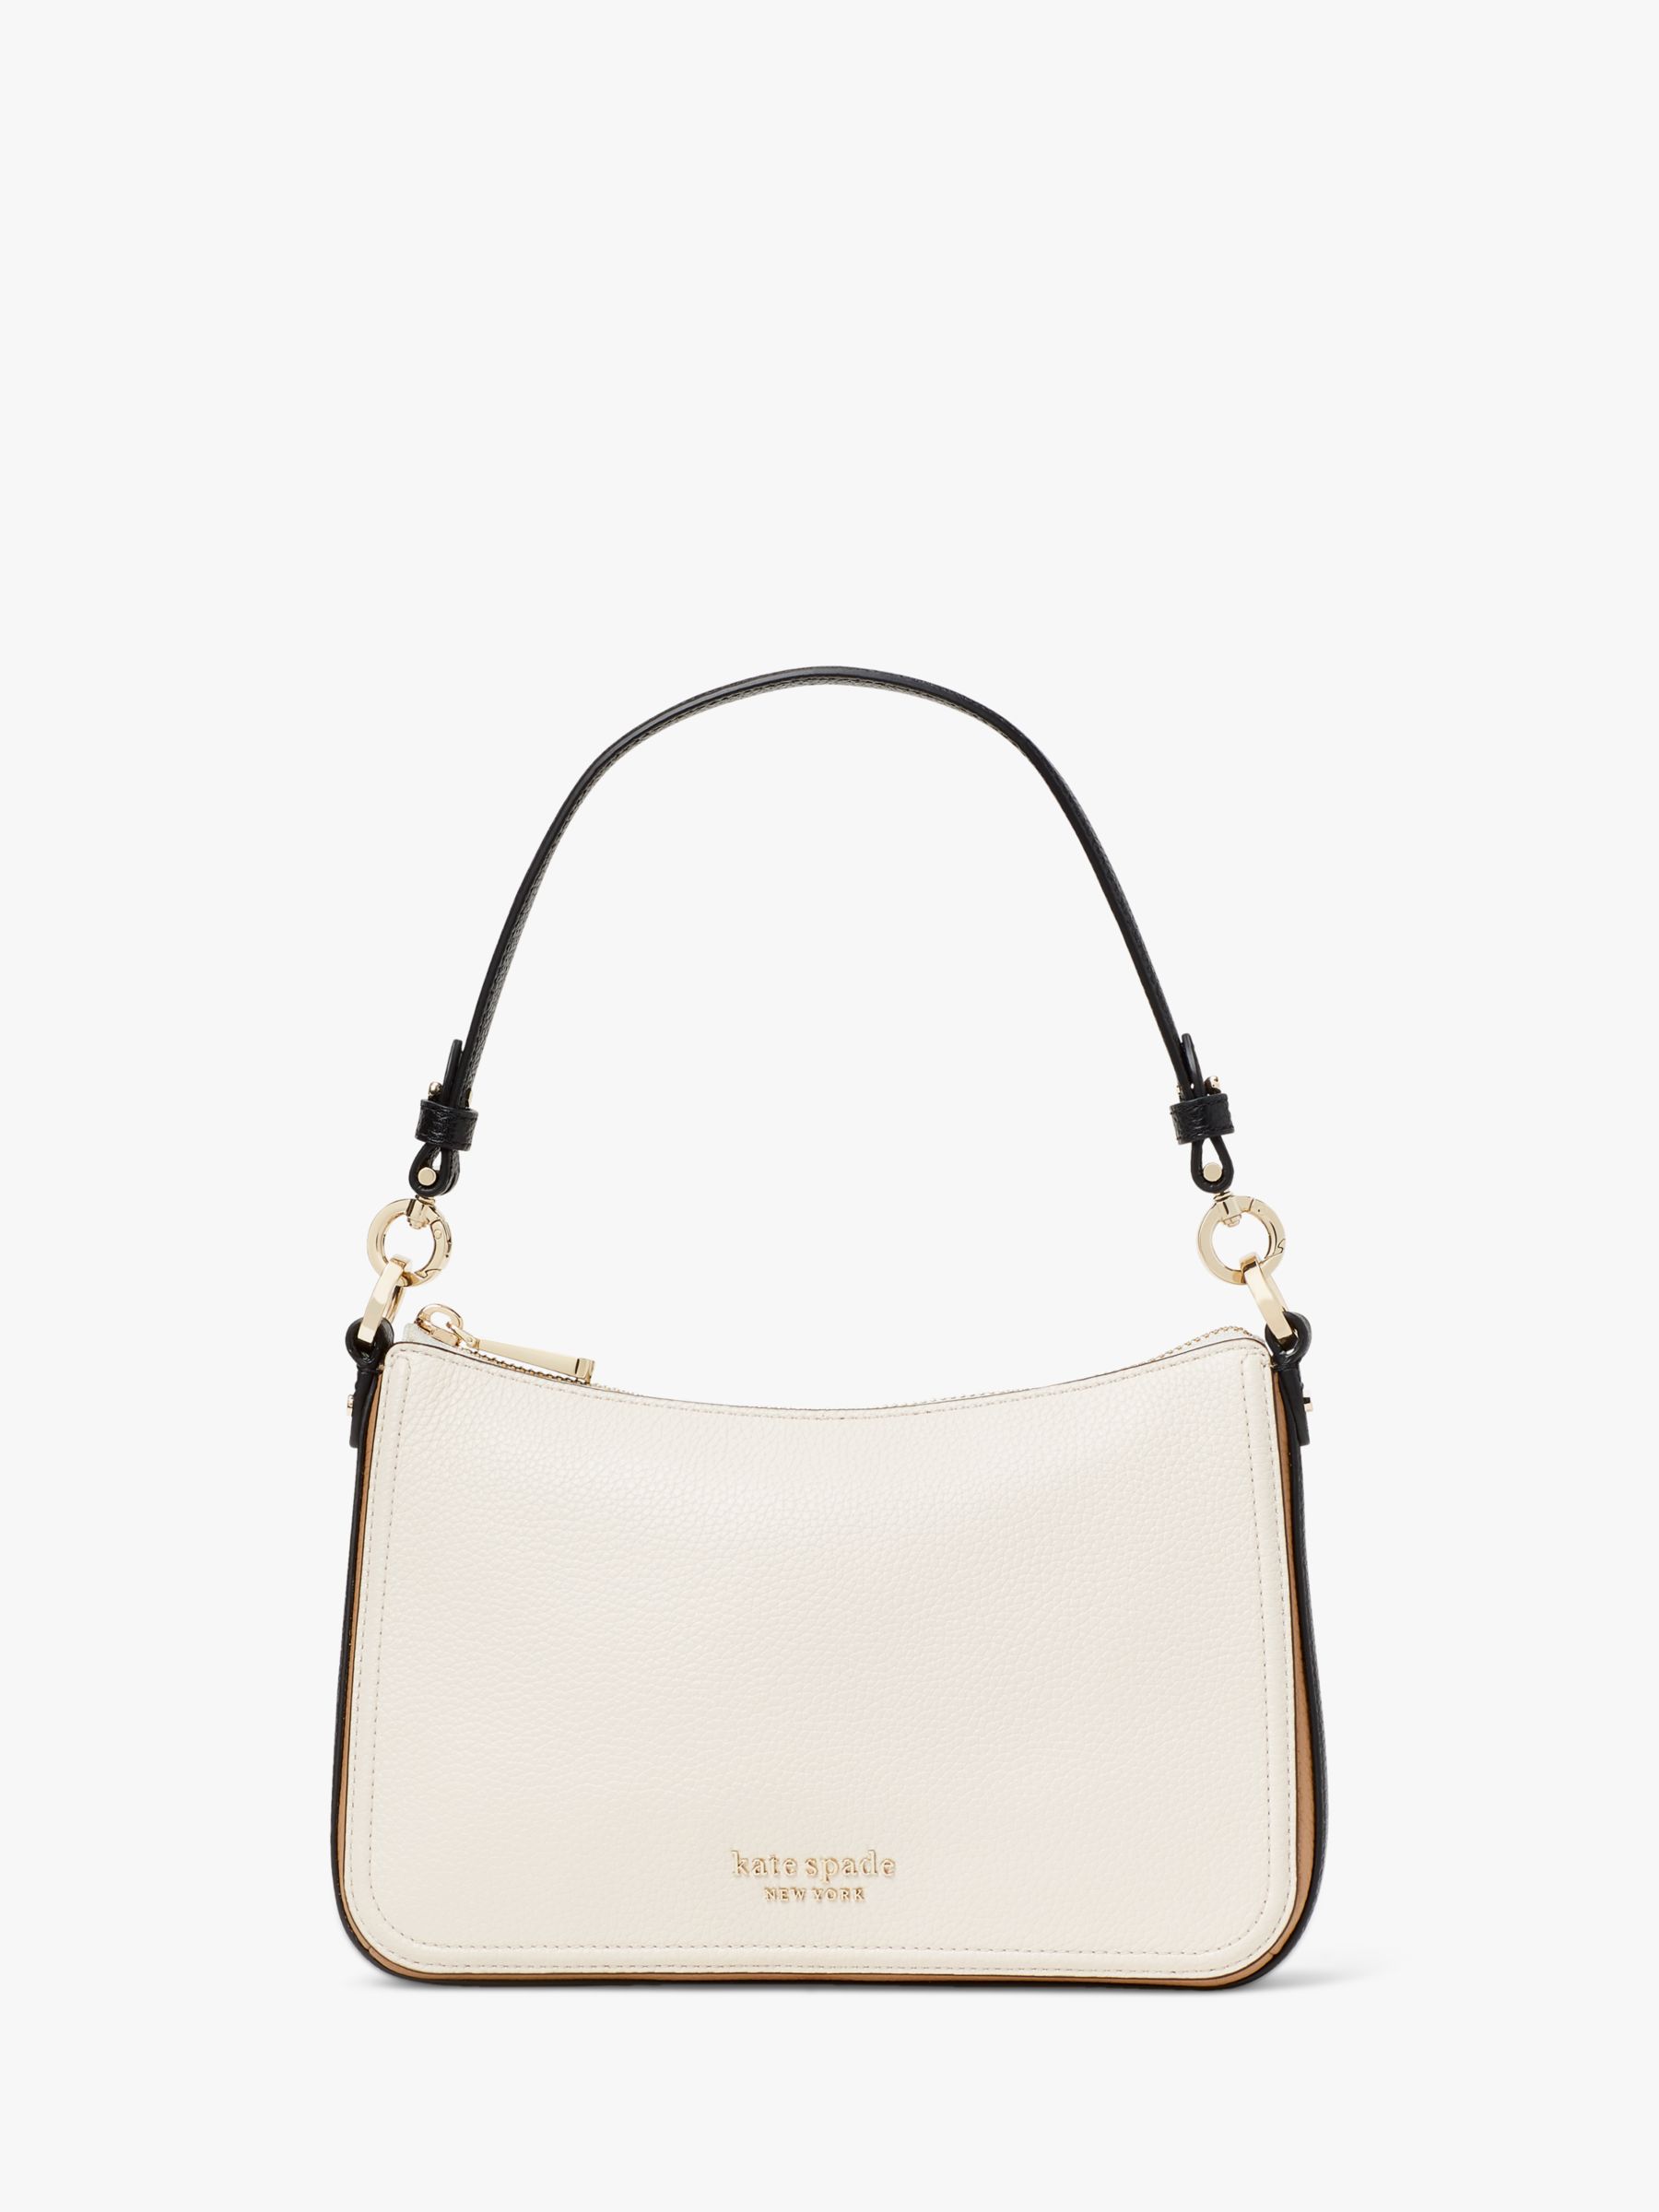 kate spade new york Hudson Leather Convertible Cross Body Bag, Parchment at  John Lewis  Partners